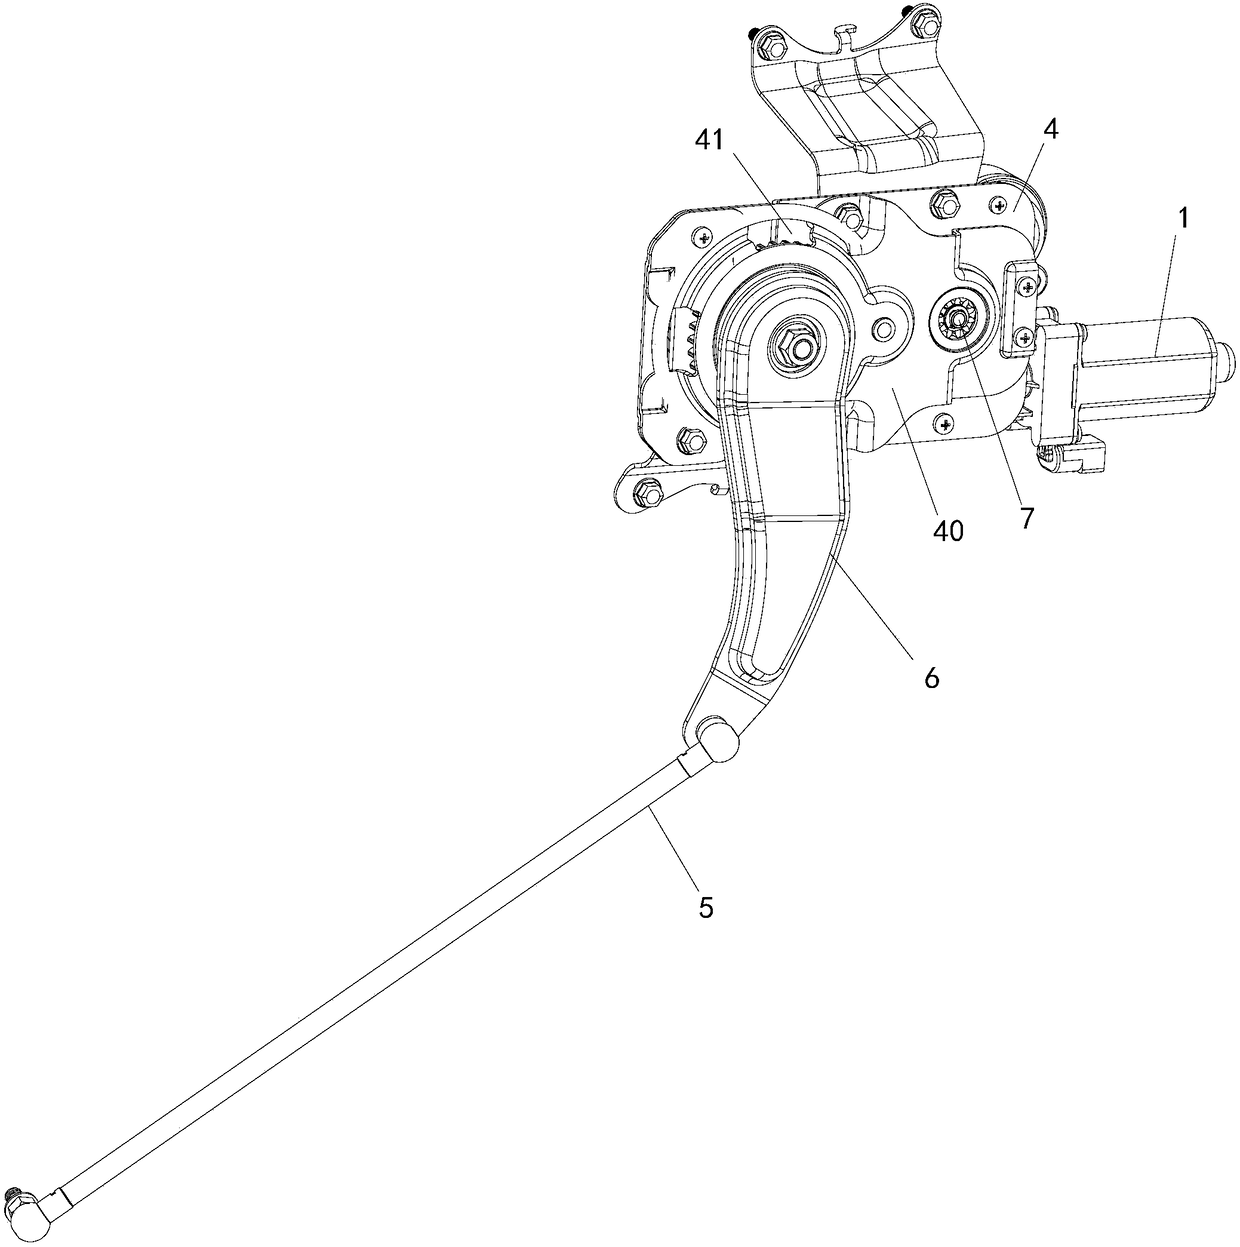 Electric opening-closing drive mechanism for automobile tail gate